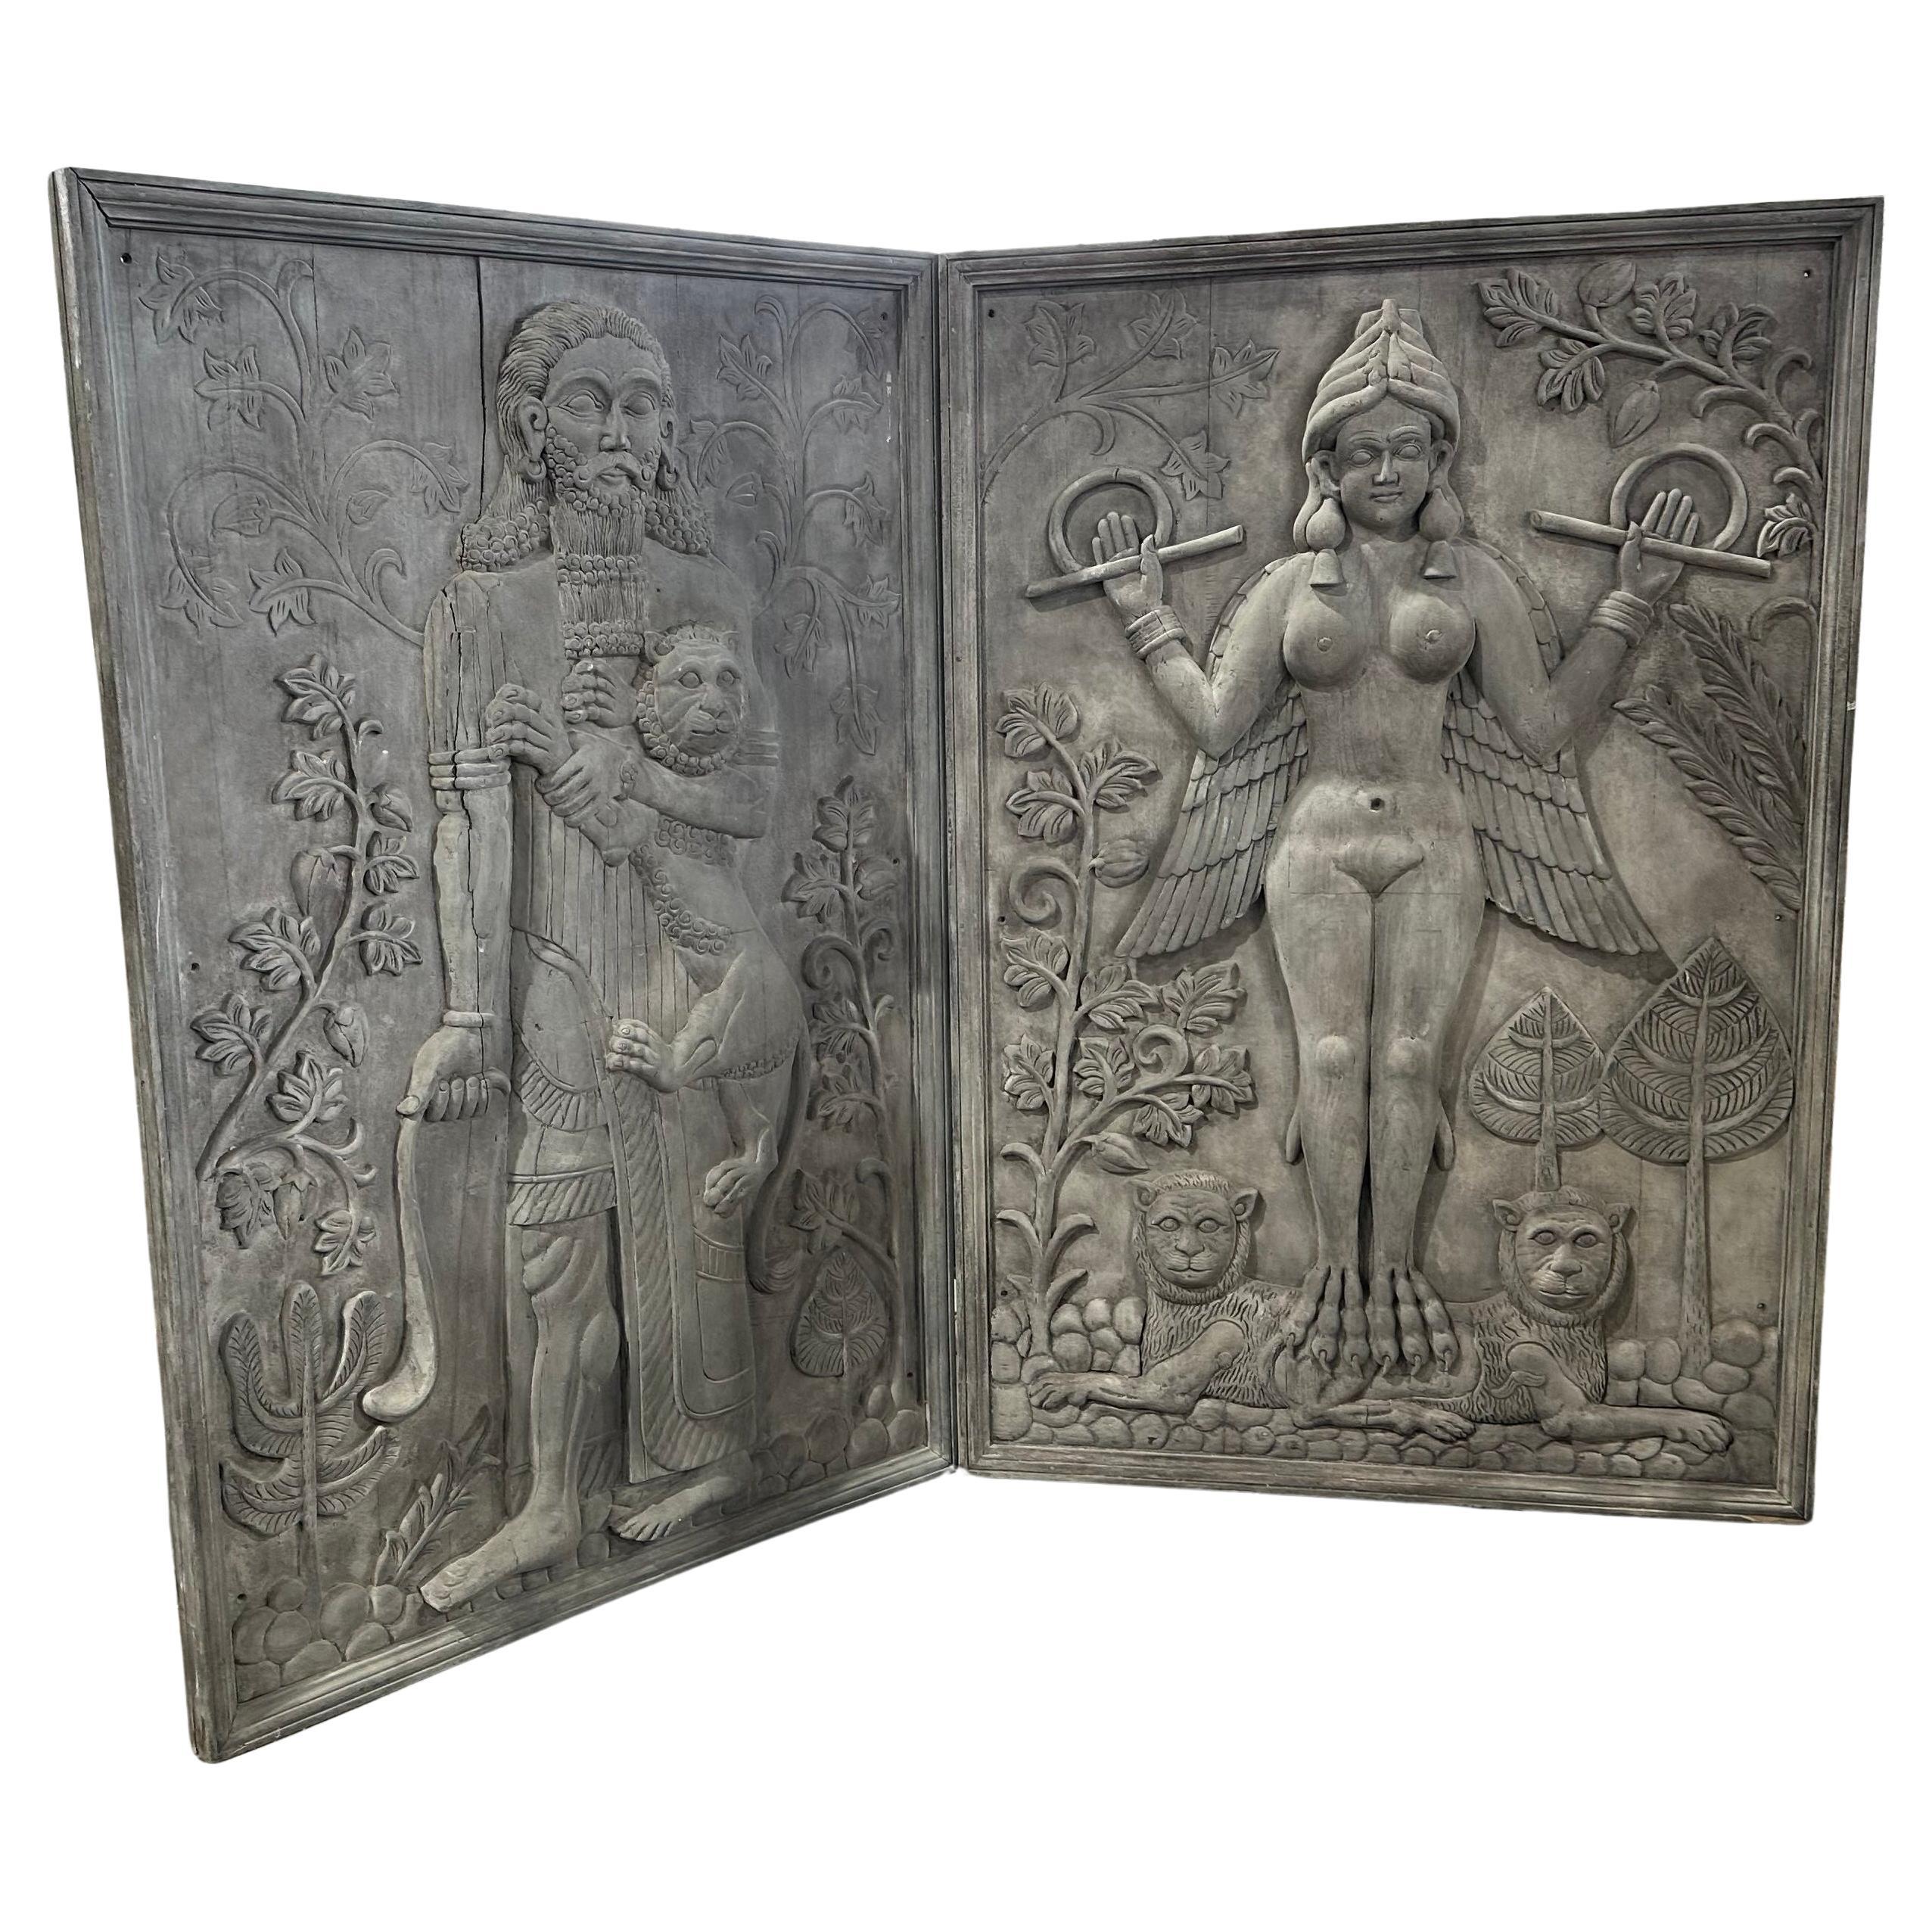 Decorative Large Pair of Wall Panels Depicting Scenes From Gilgamesh. For Sale